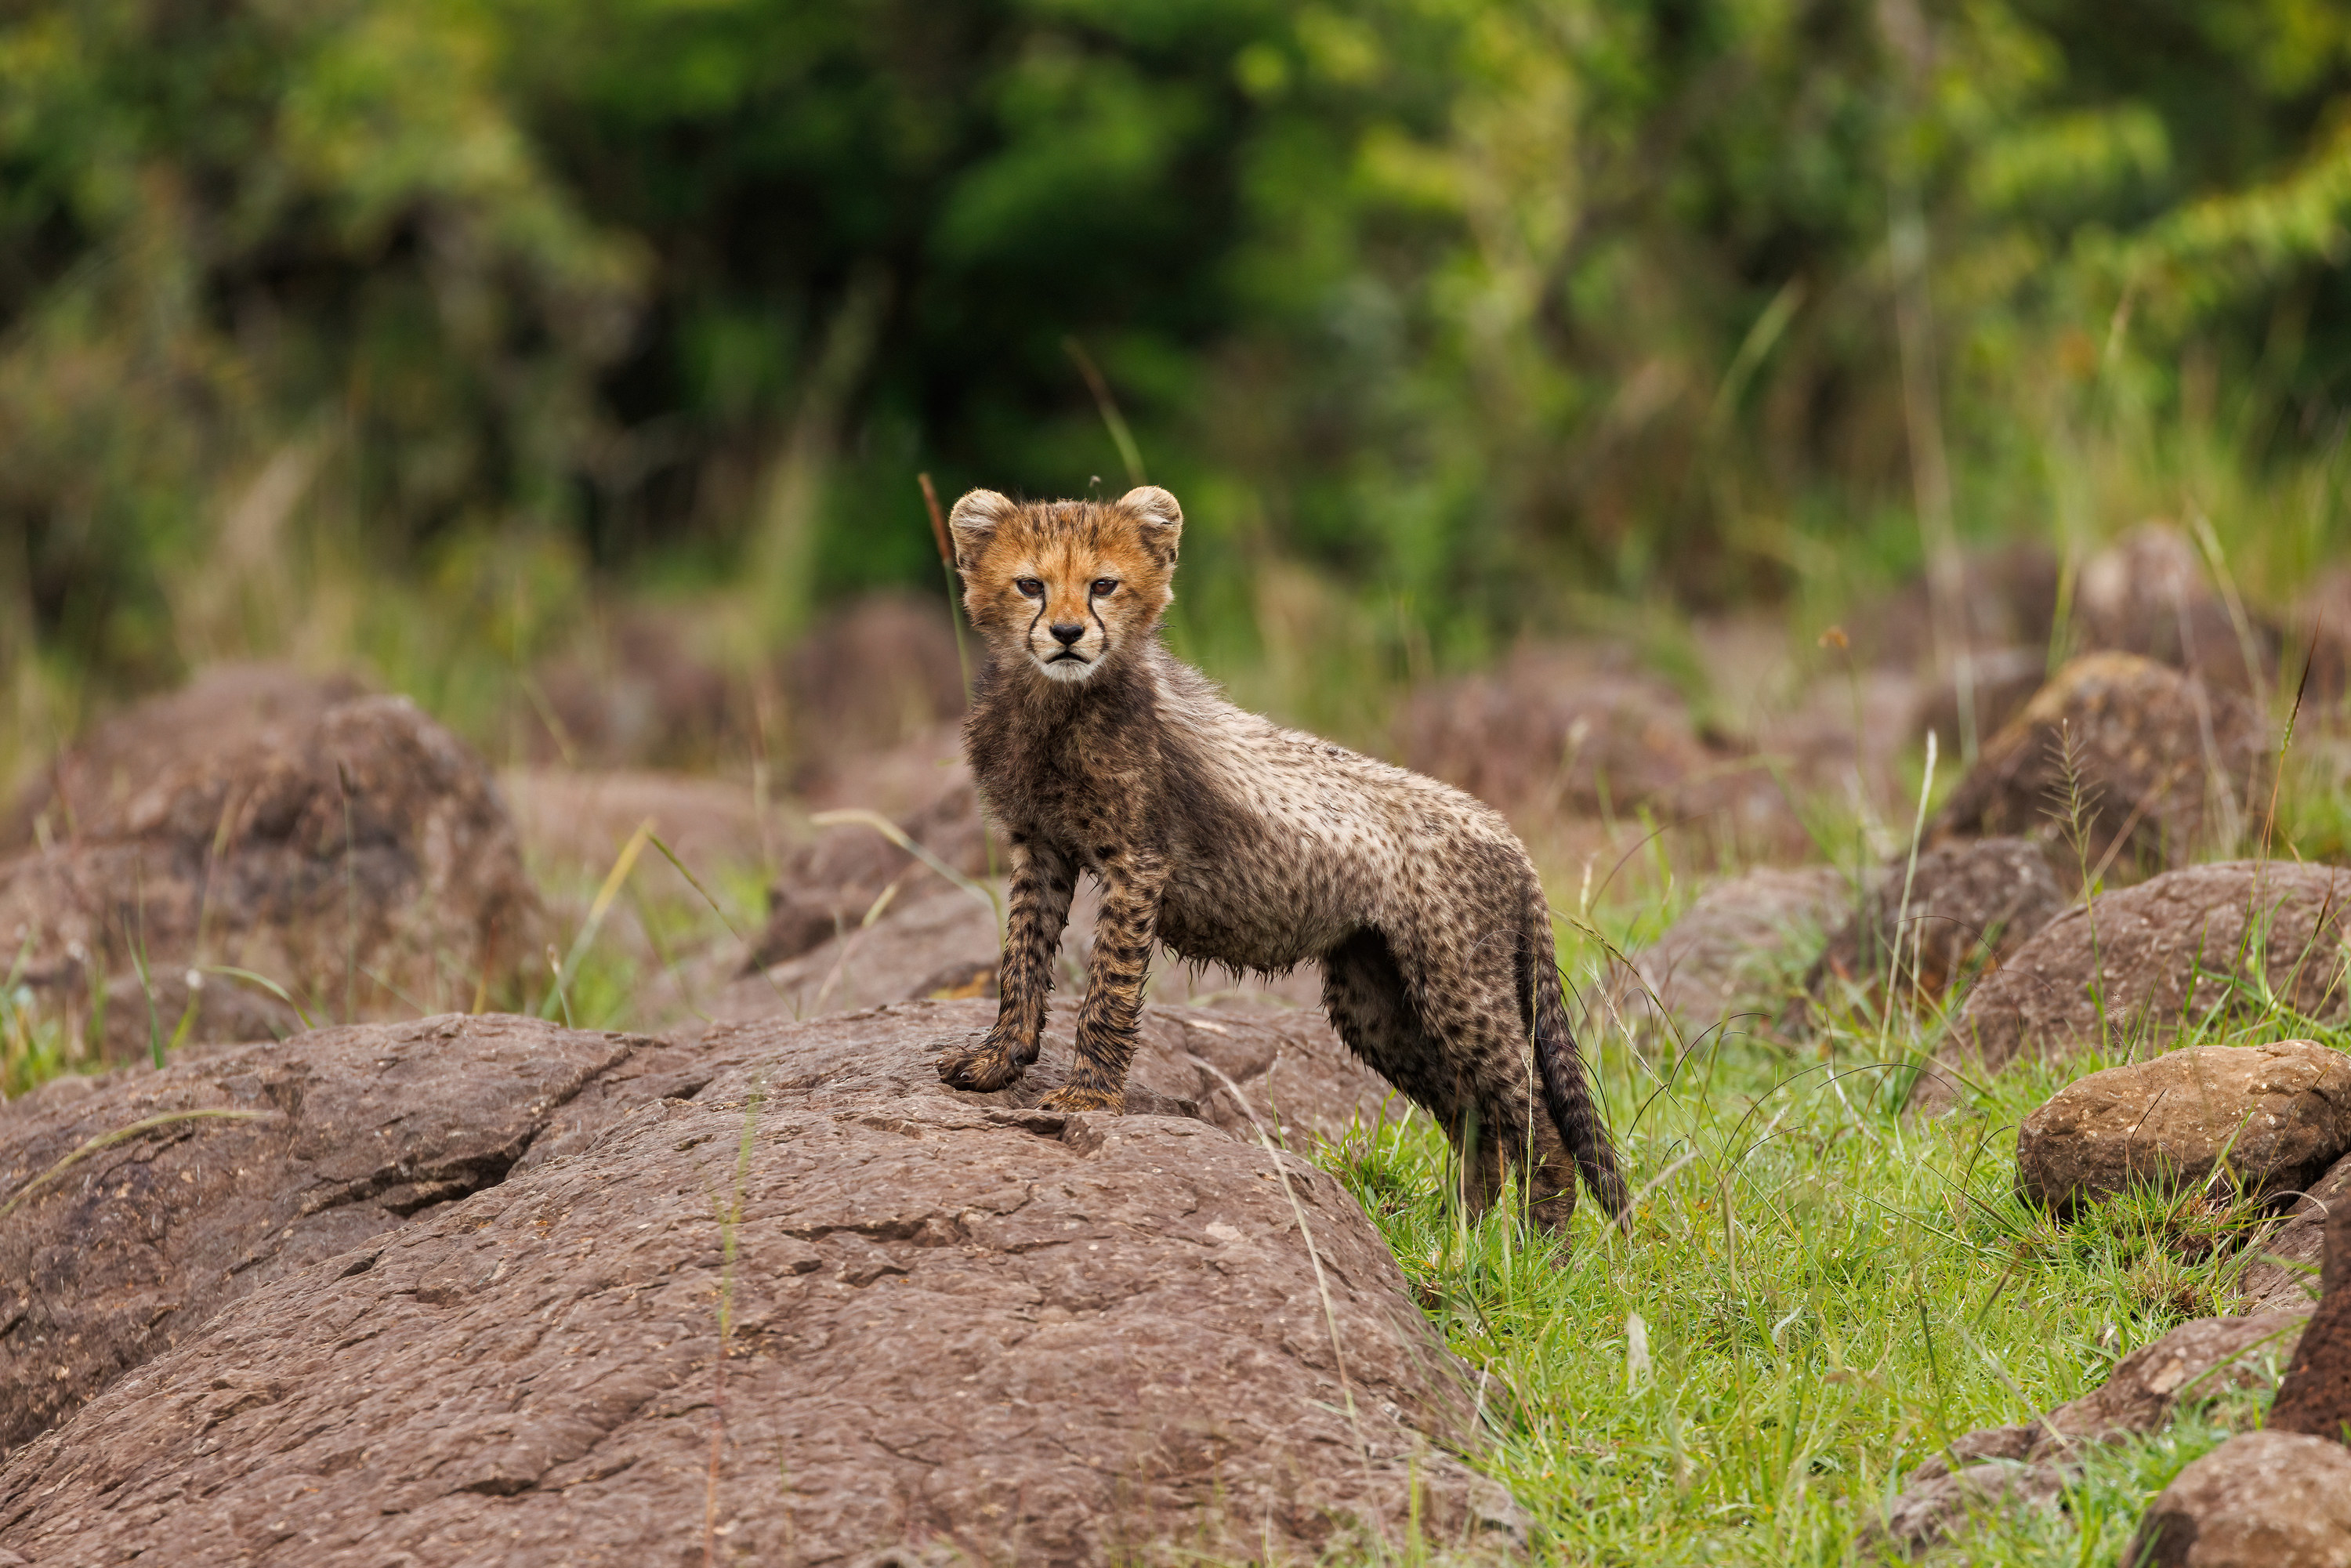 a baby cheetah perched on a rock looks at the camera